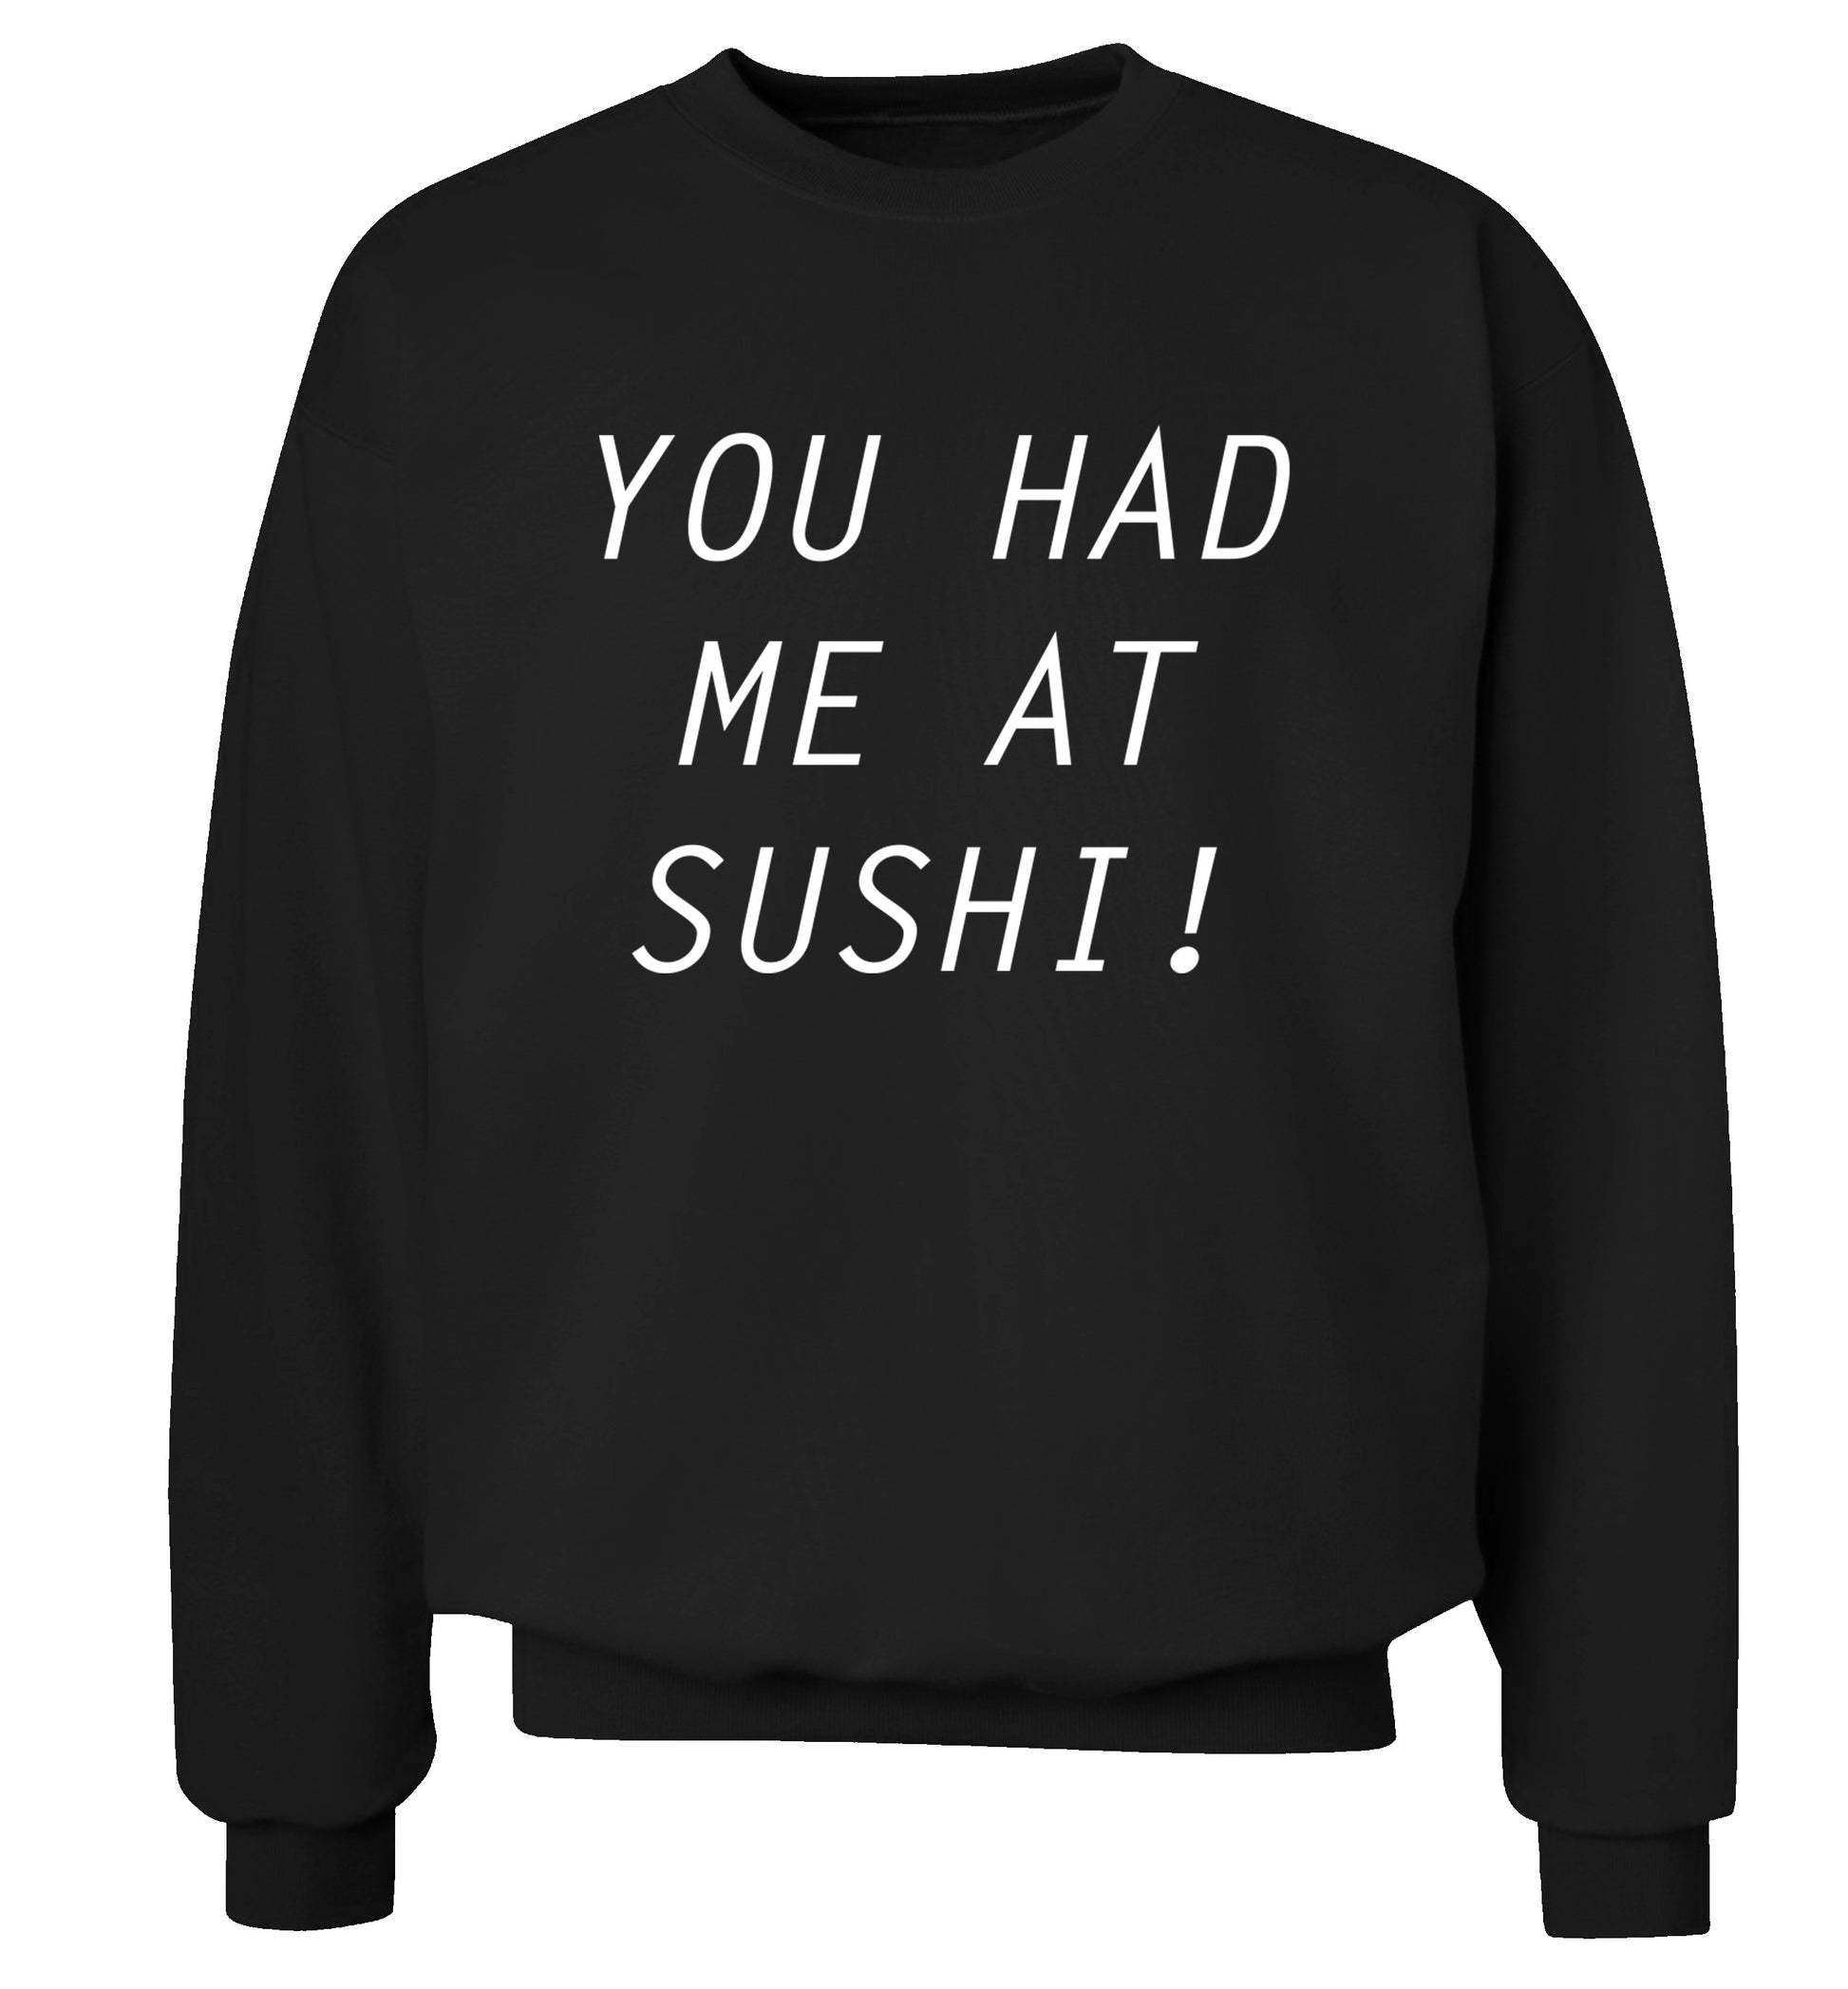 You had me at sushi Adult's unisex black Sweater 2XL